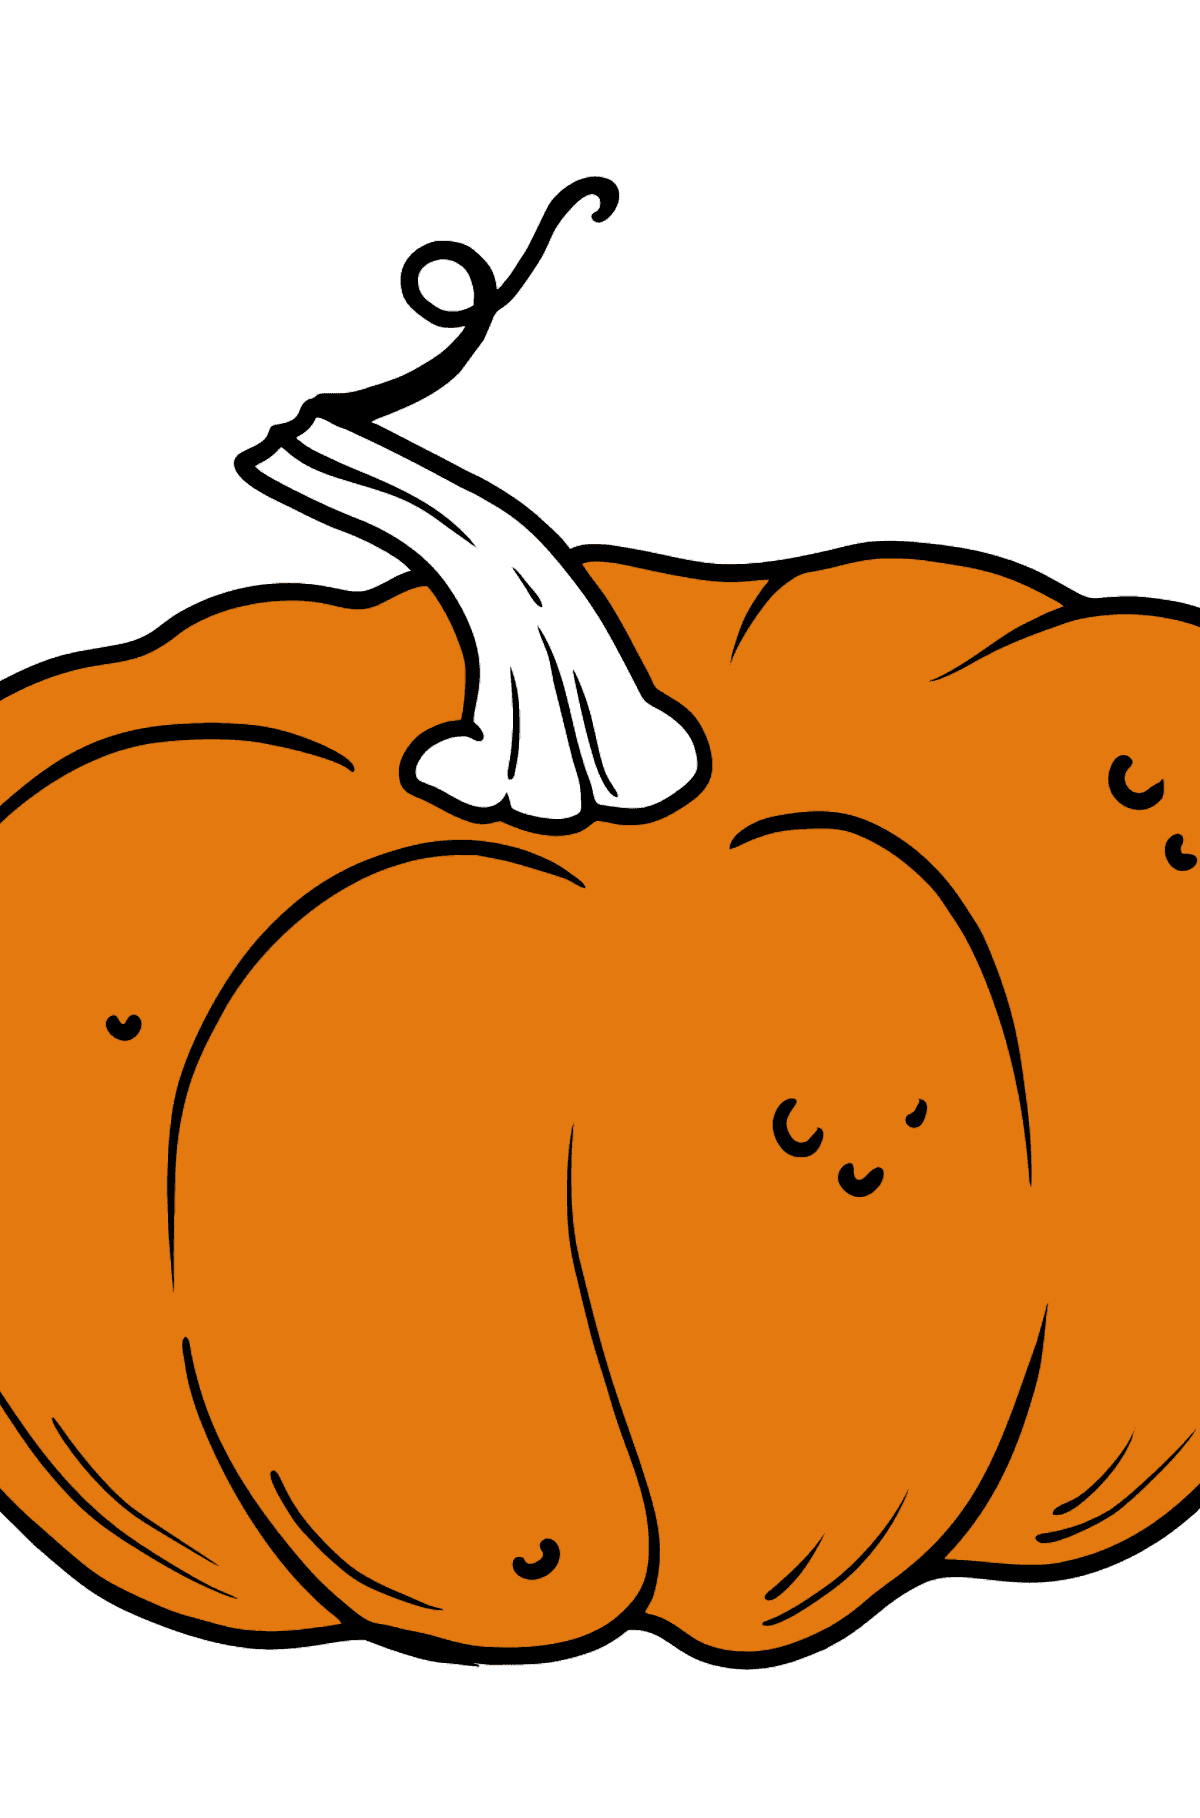 Pumpkin coloring page - Coloring Pages for Kids